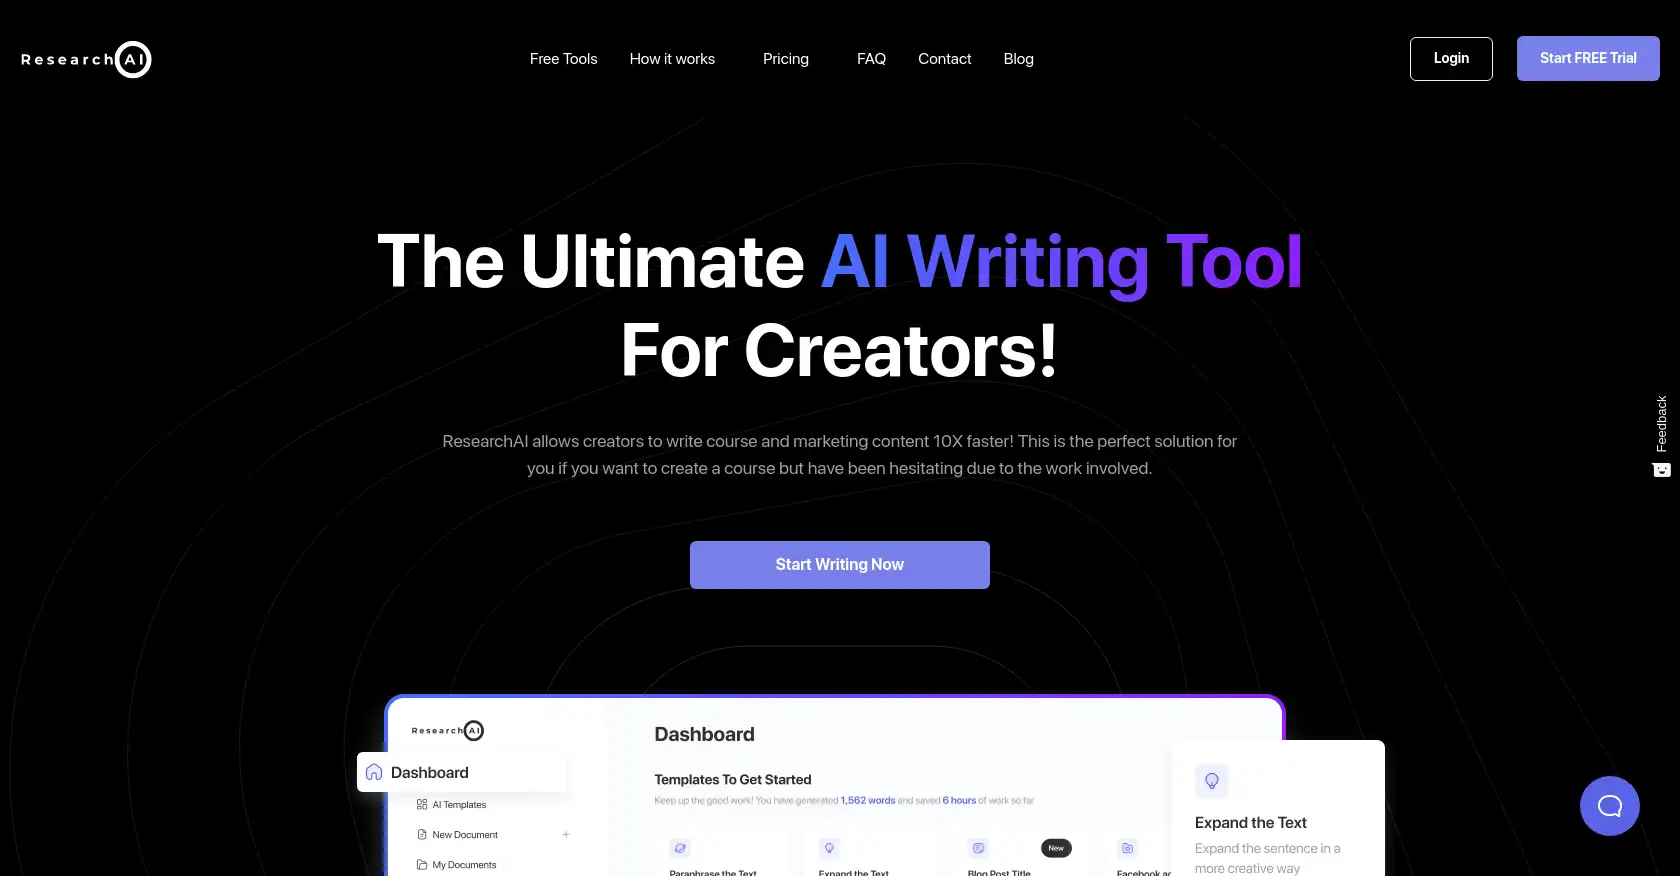 Research AI - AI tool for Content Creation, Marketing, Course Creation, Tutor Assistant